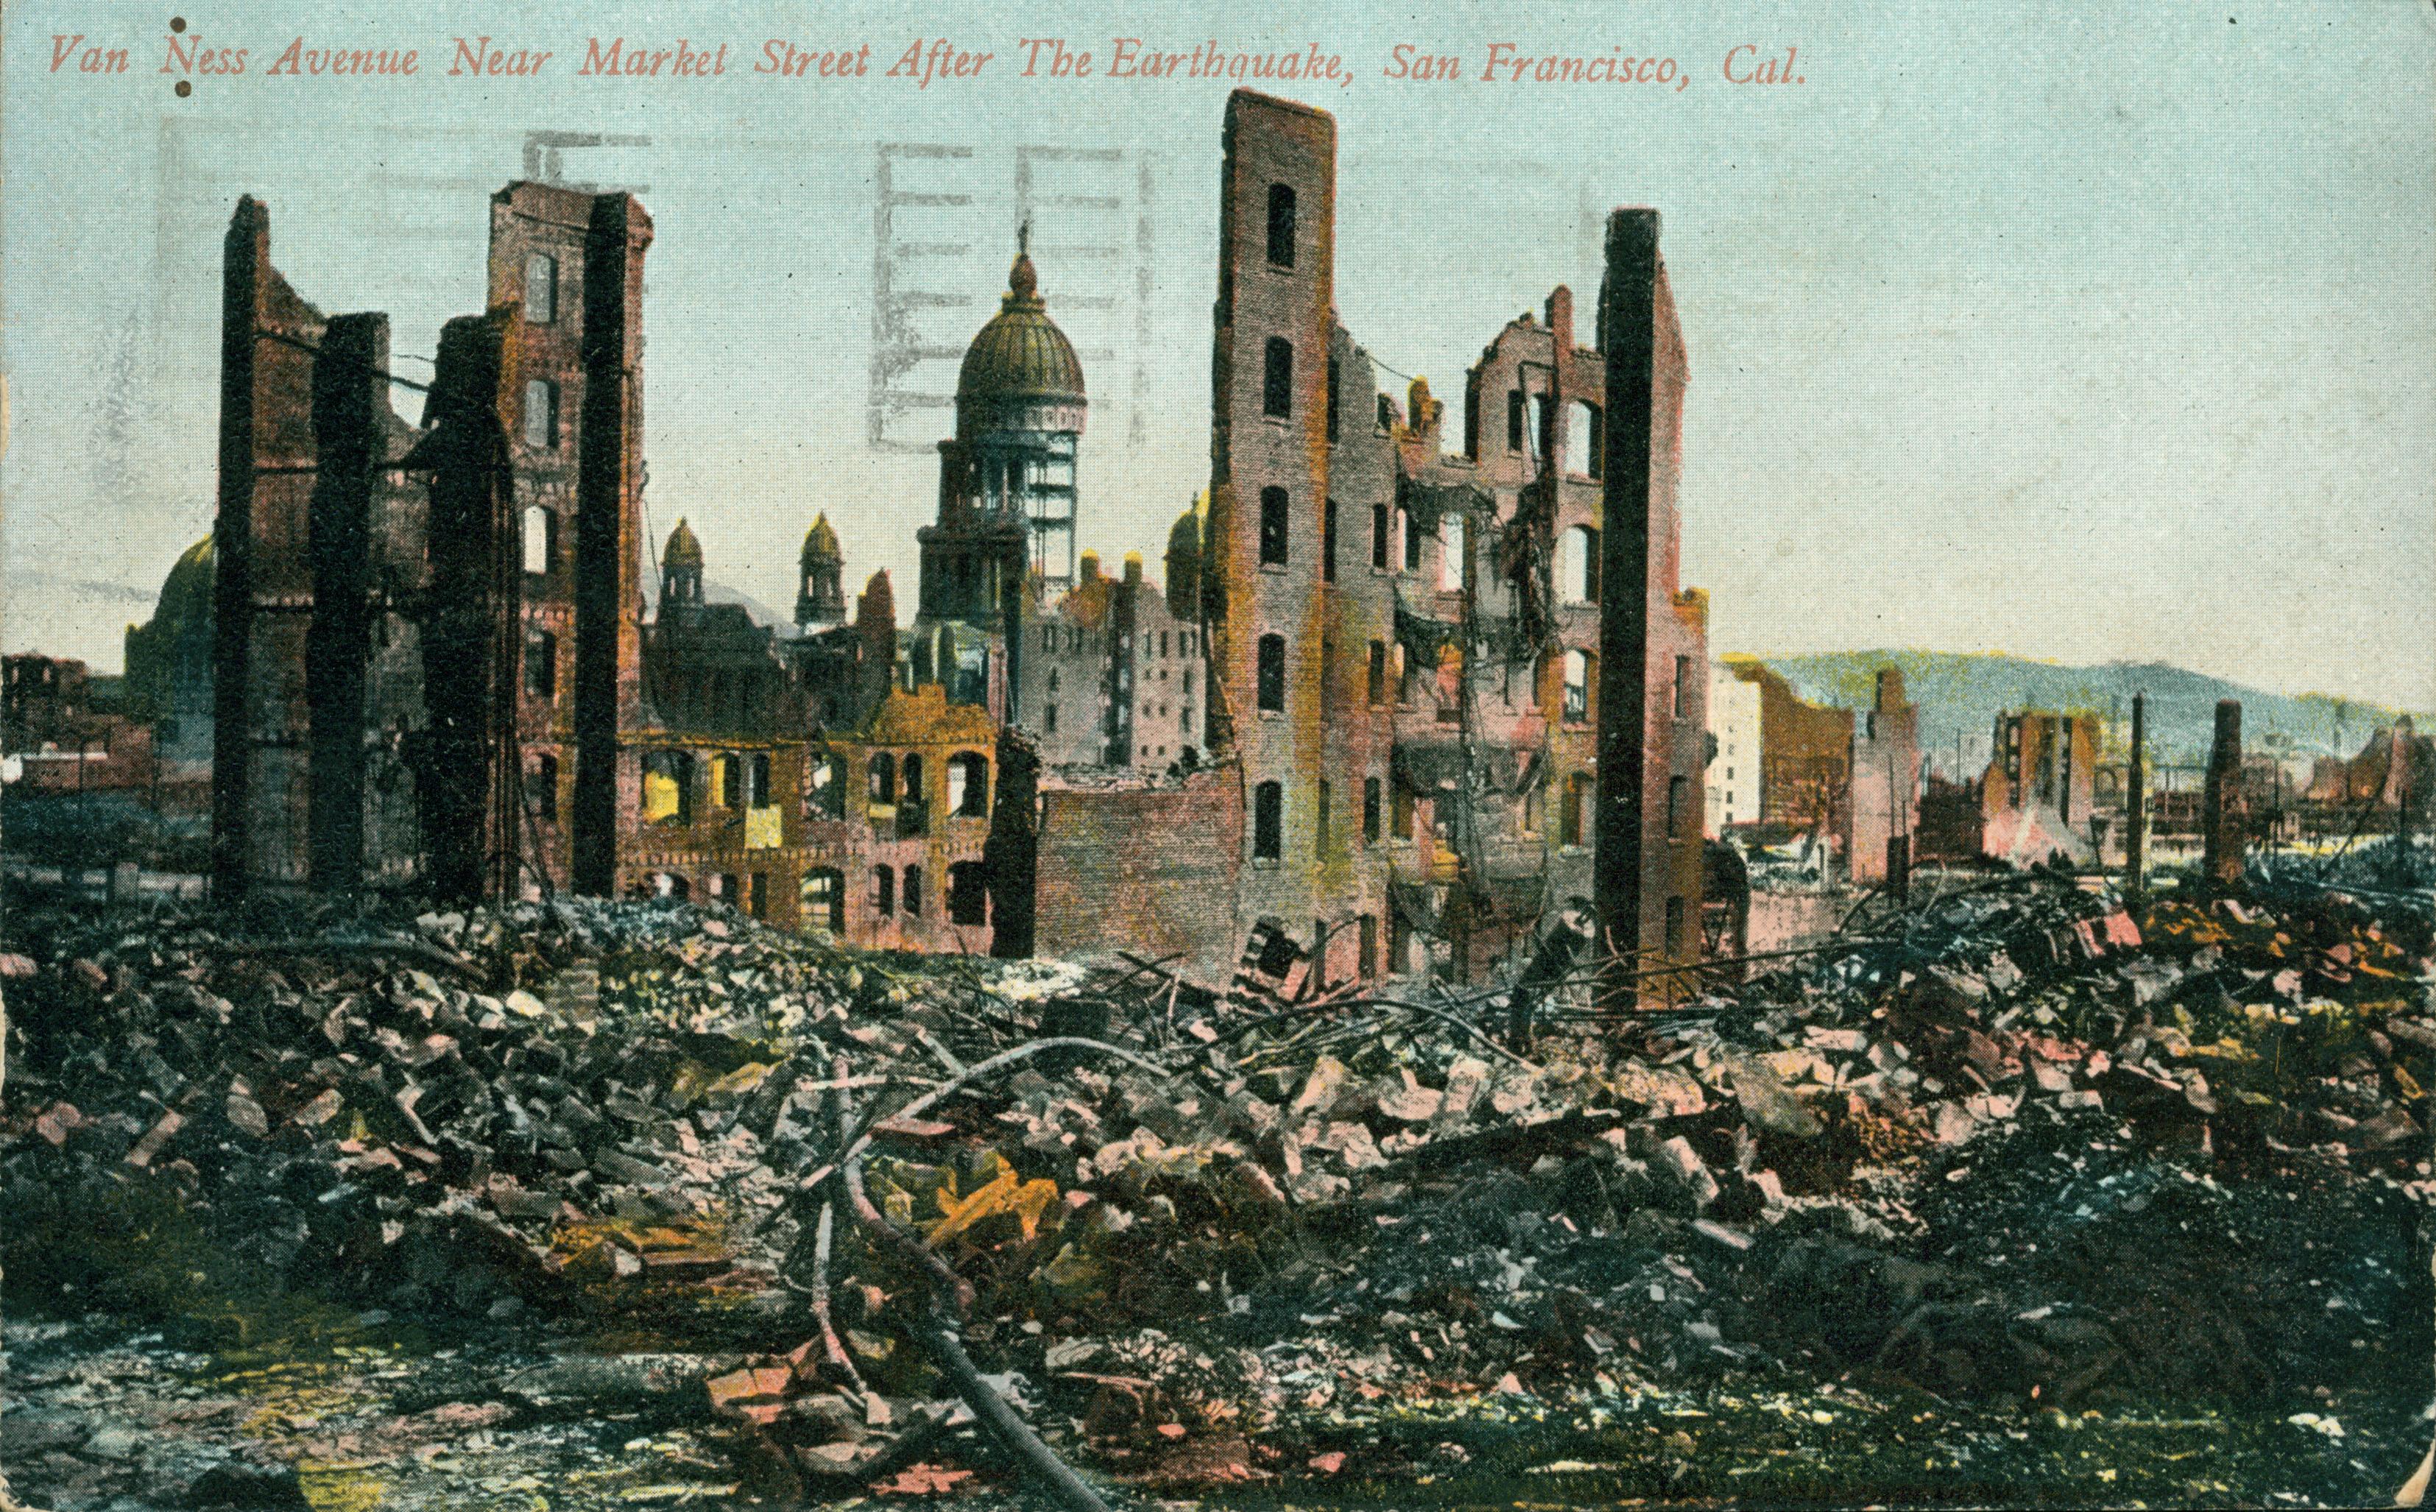 A drawing of rubble and ruined buildings along Van Ness Avenue, San Francisco, California